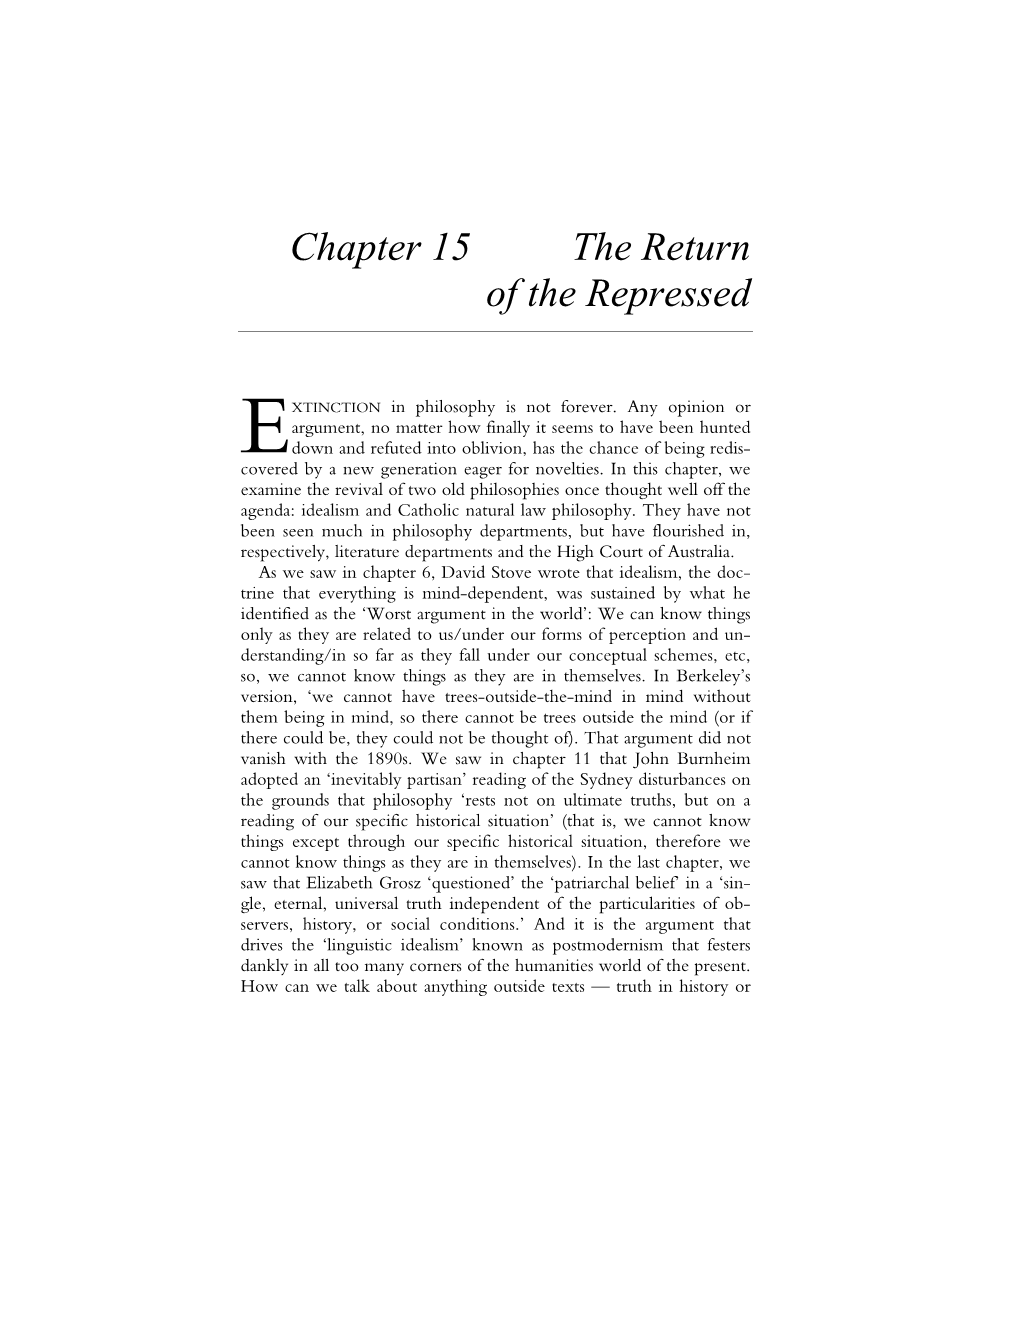 Chapter 15 the Return of the Repressed